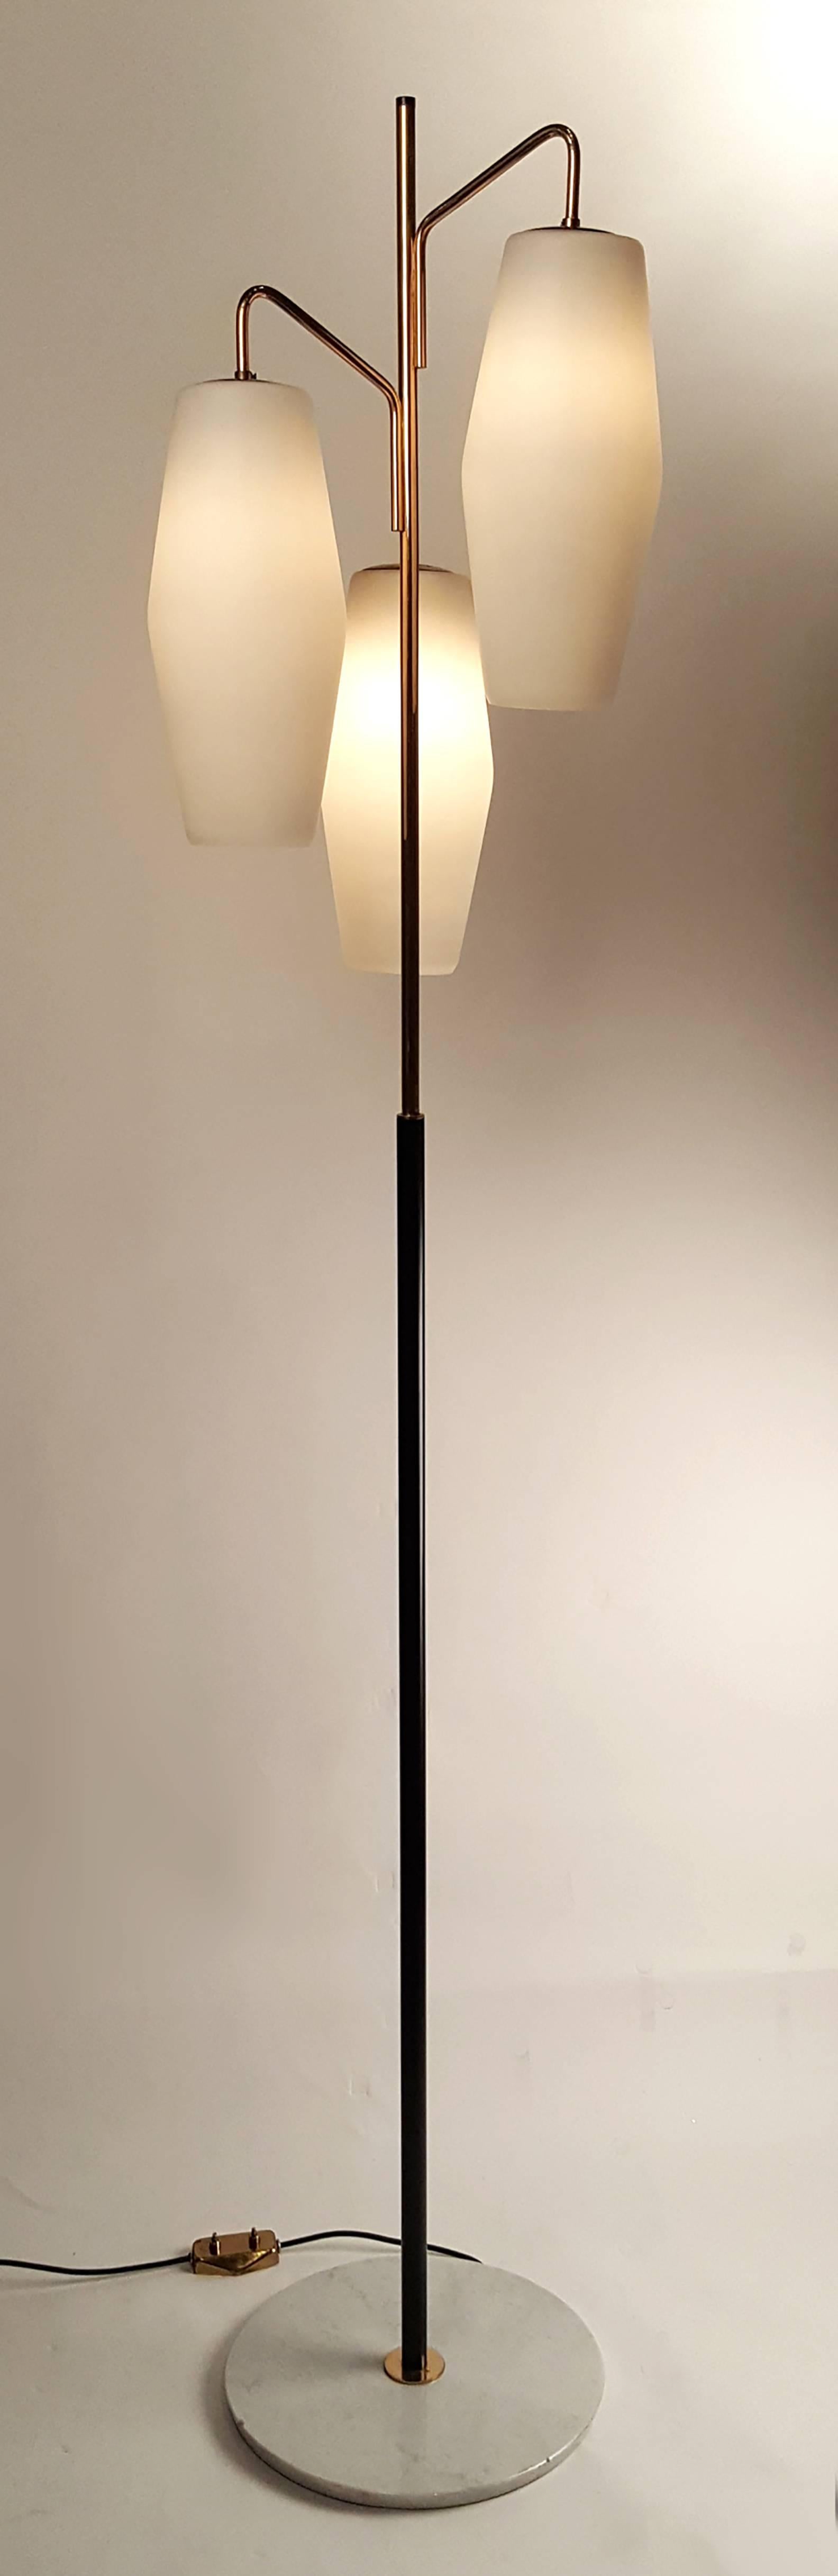 Frosted glass shades suspended on a gilt and black lacquered metal stem on a Carrara marble base with original foot switch. Stilnovo hallmark impressed into the steel to which the shades mount. Completely rewired.

Literature:
Thomas Brau¨niger,